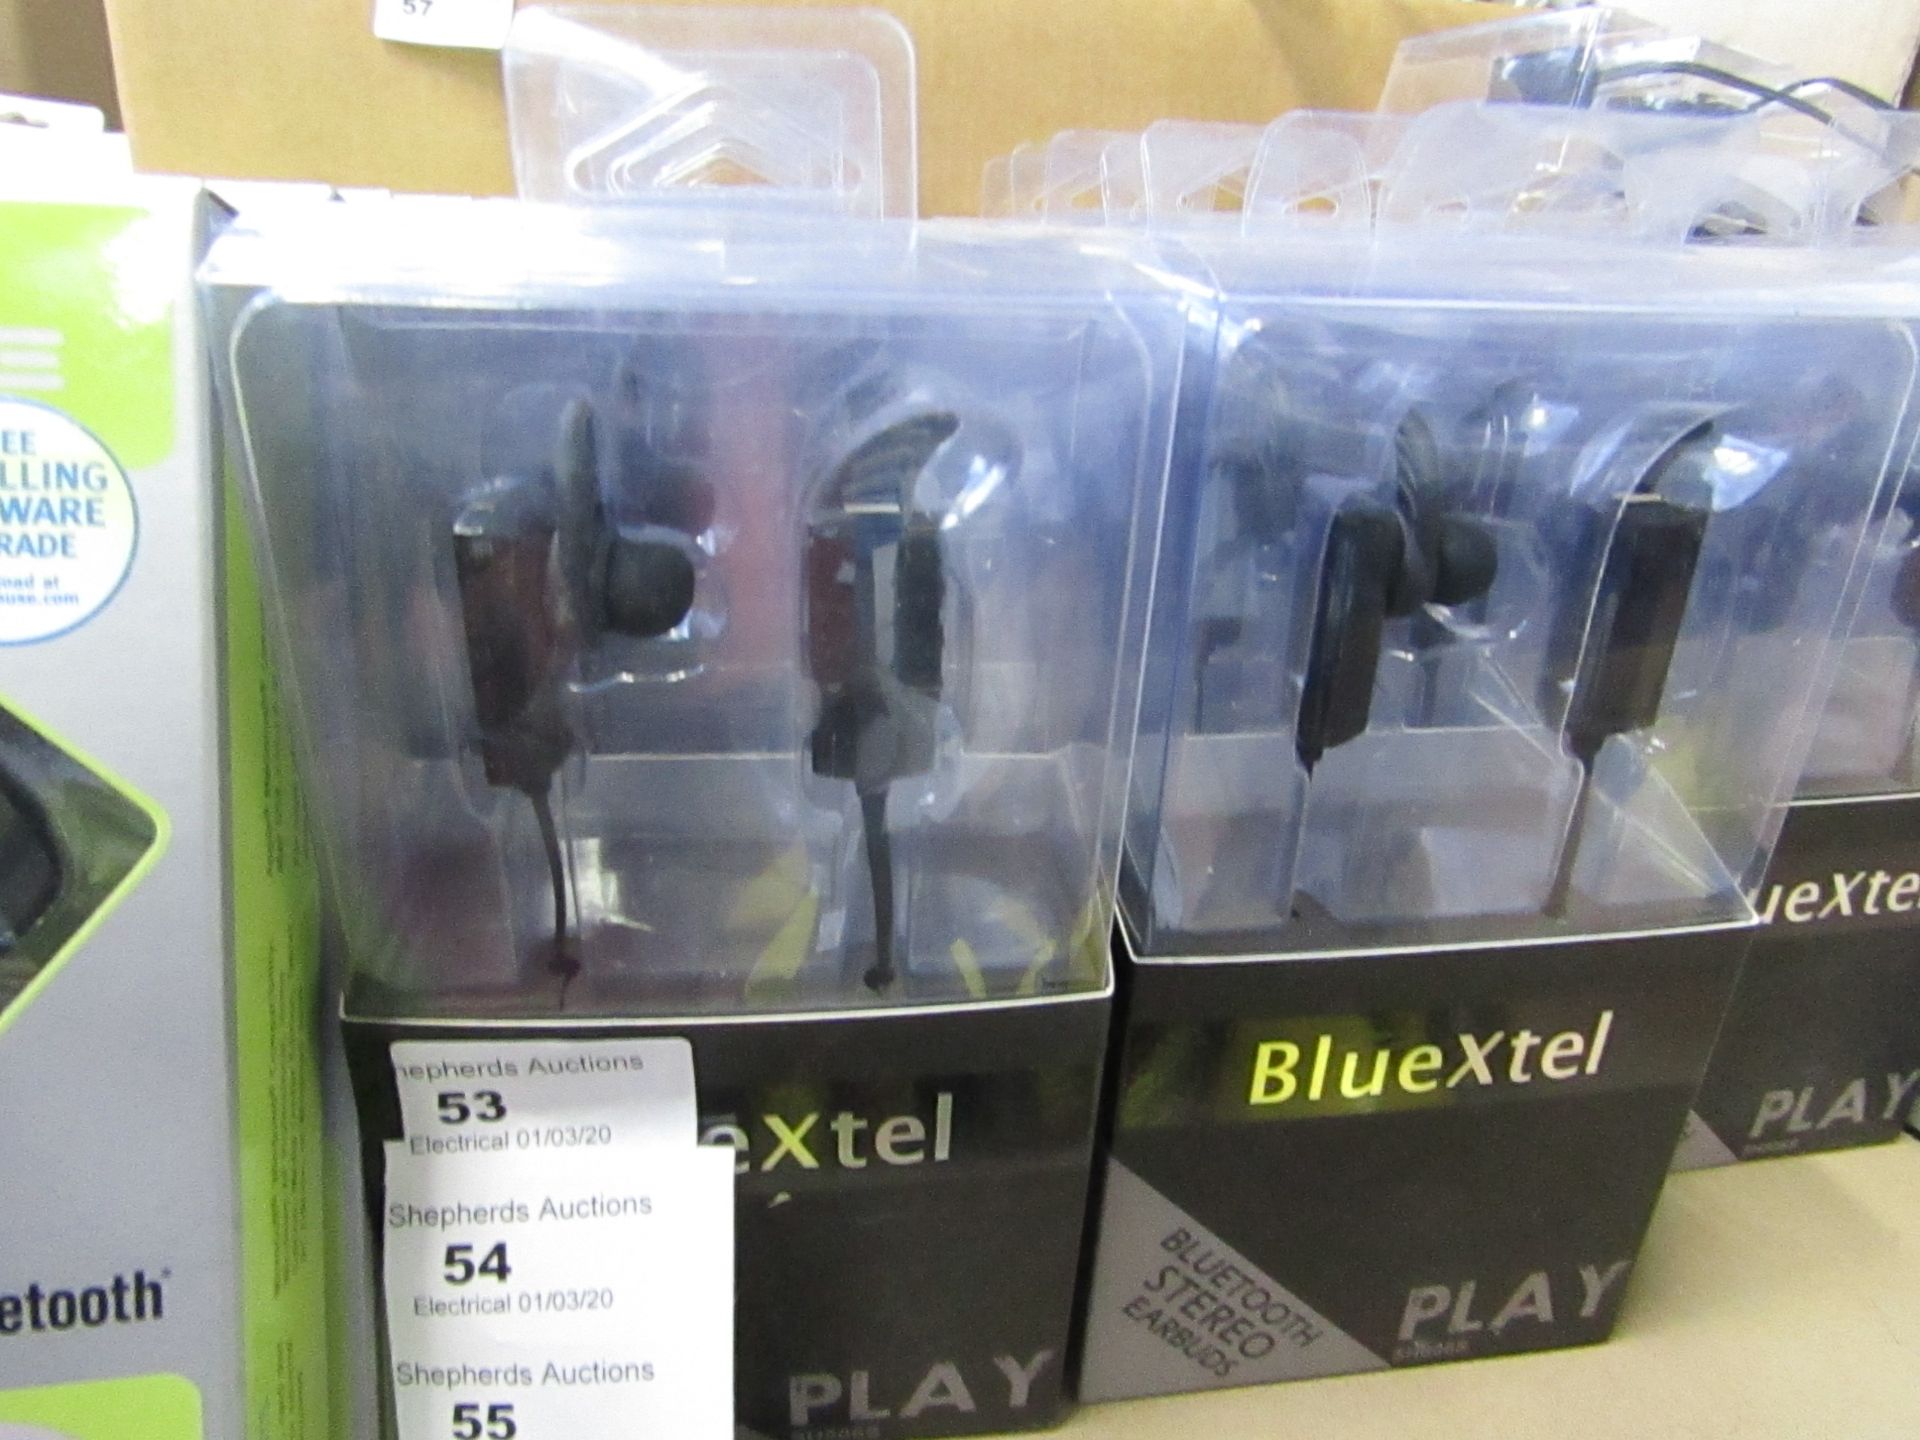 5x BlueXtel Bluetooth earphones, all new and packaged.